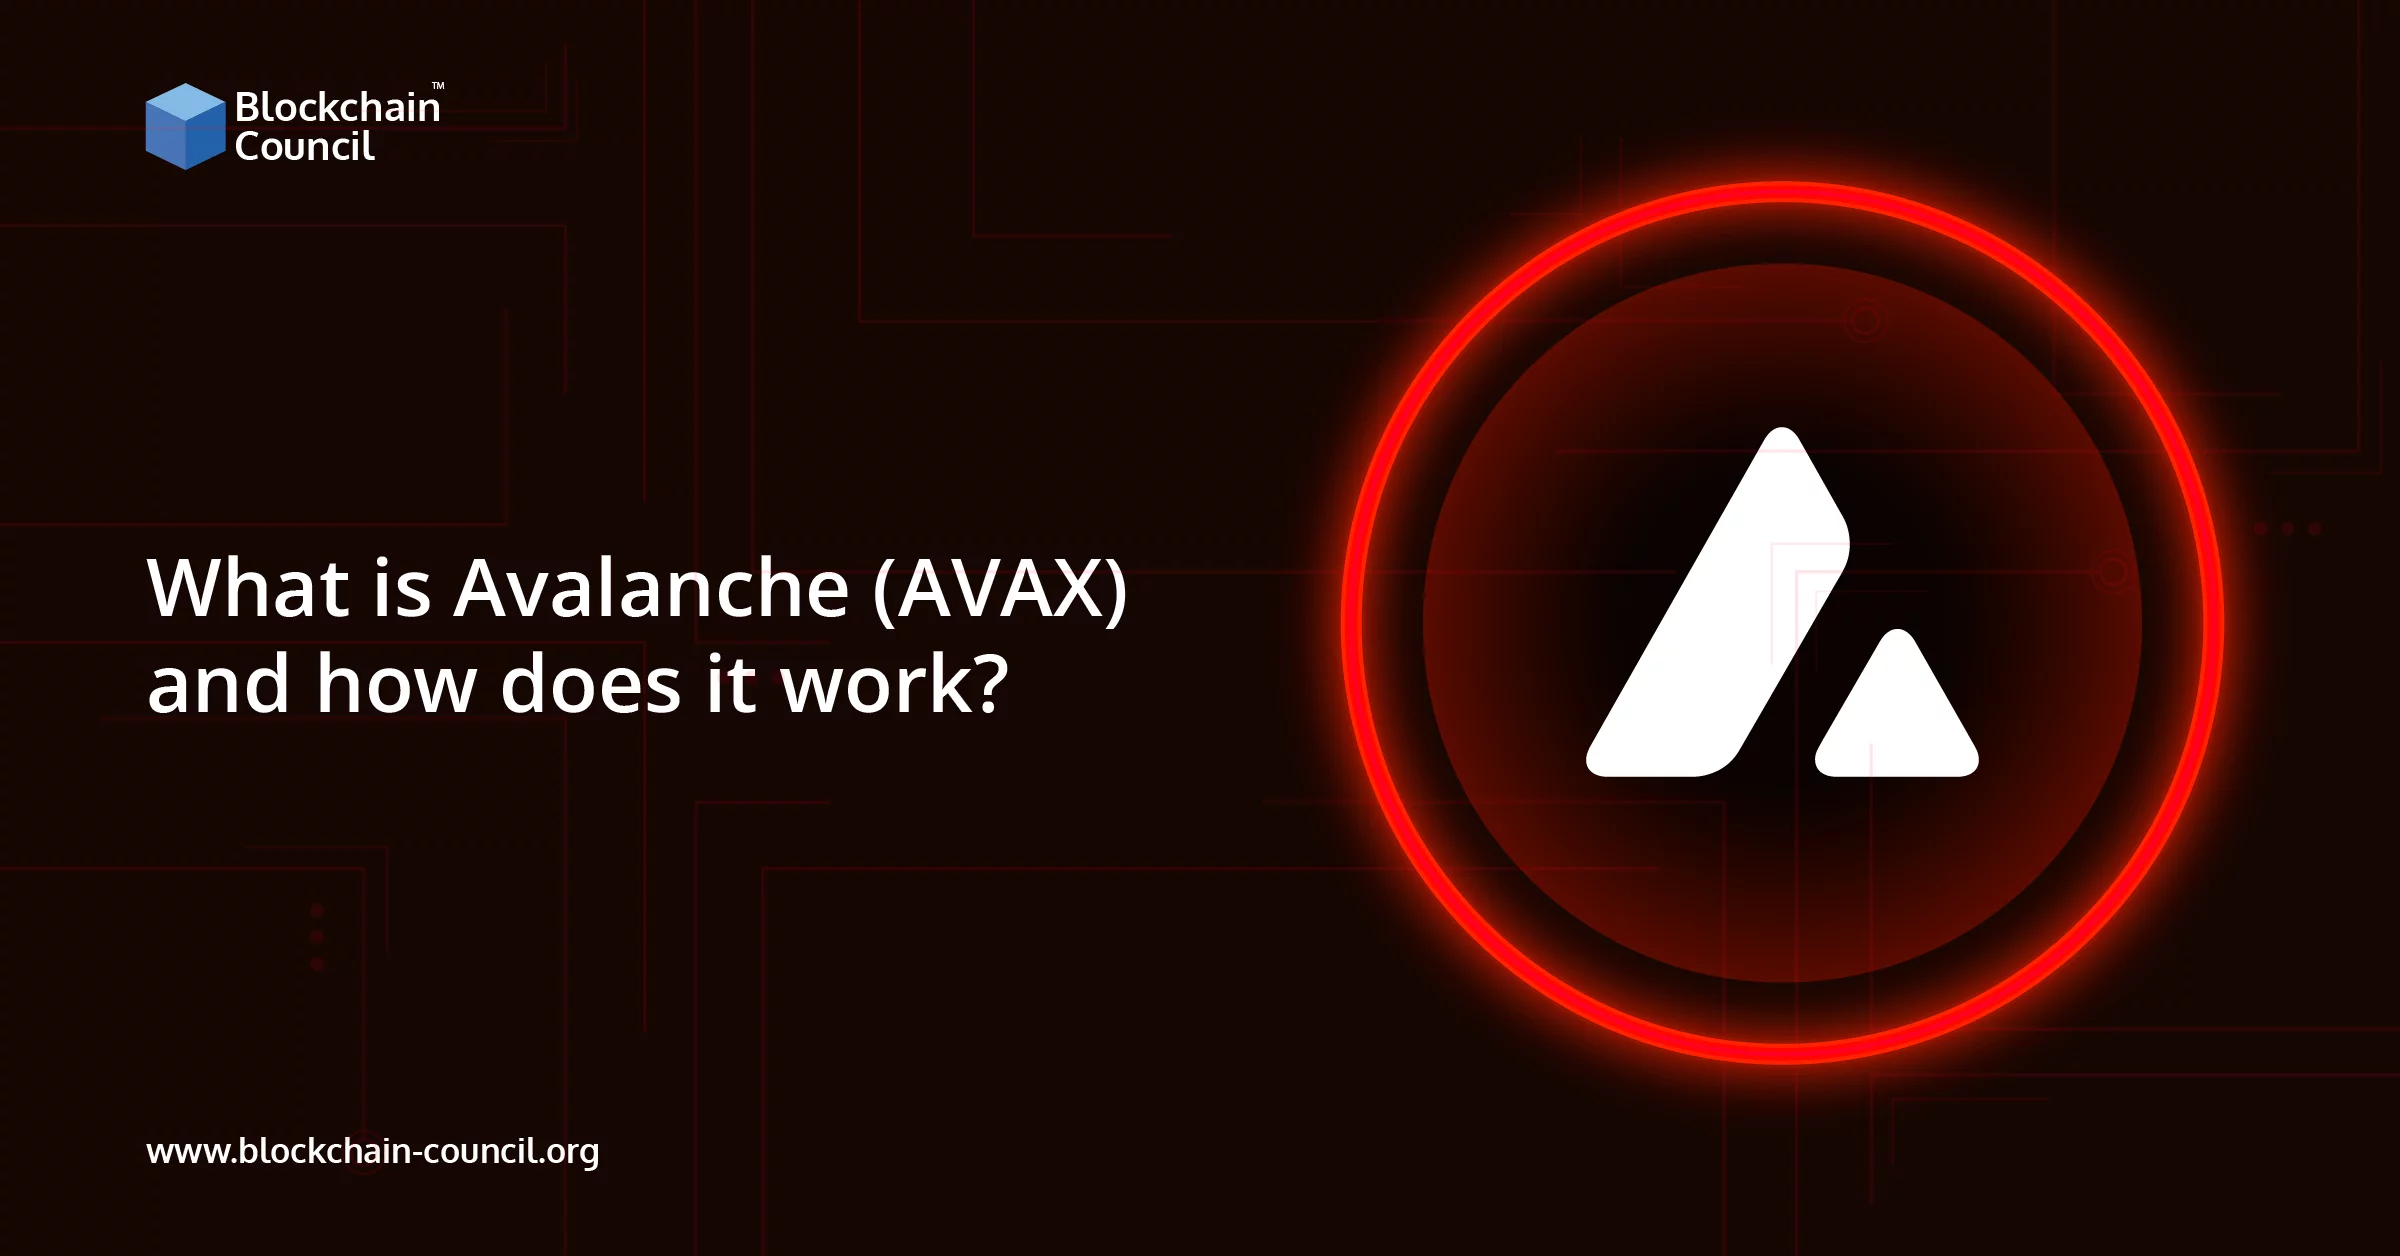 What is Avalanche (AVAX) and how does it work